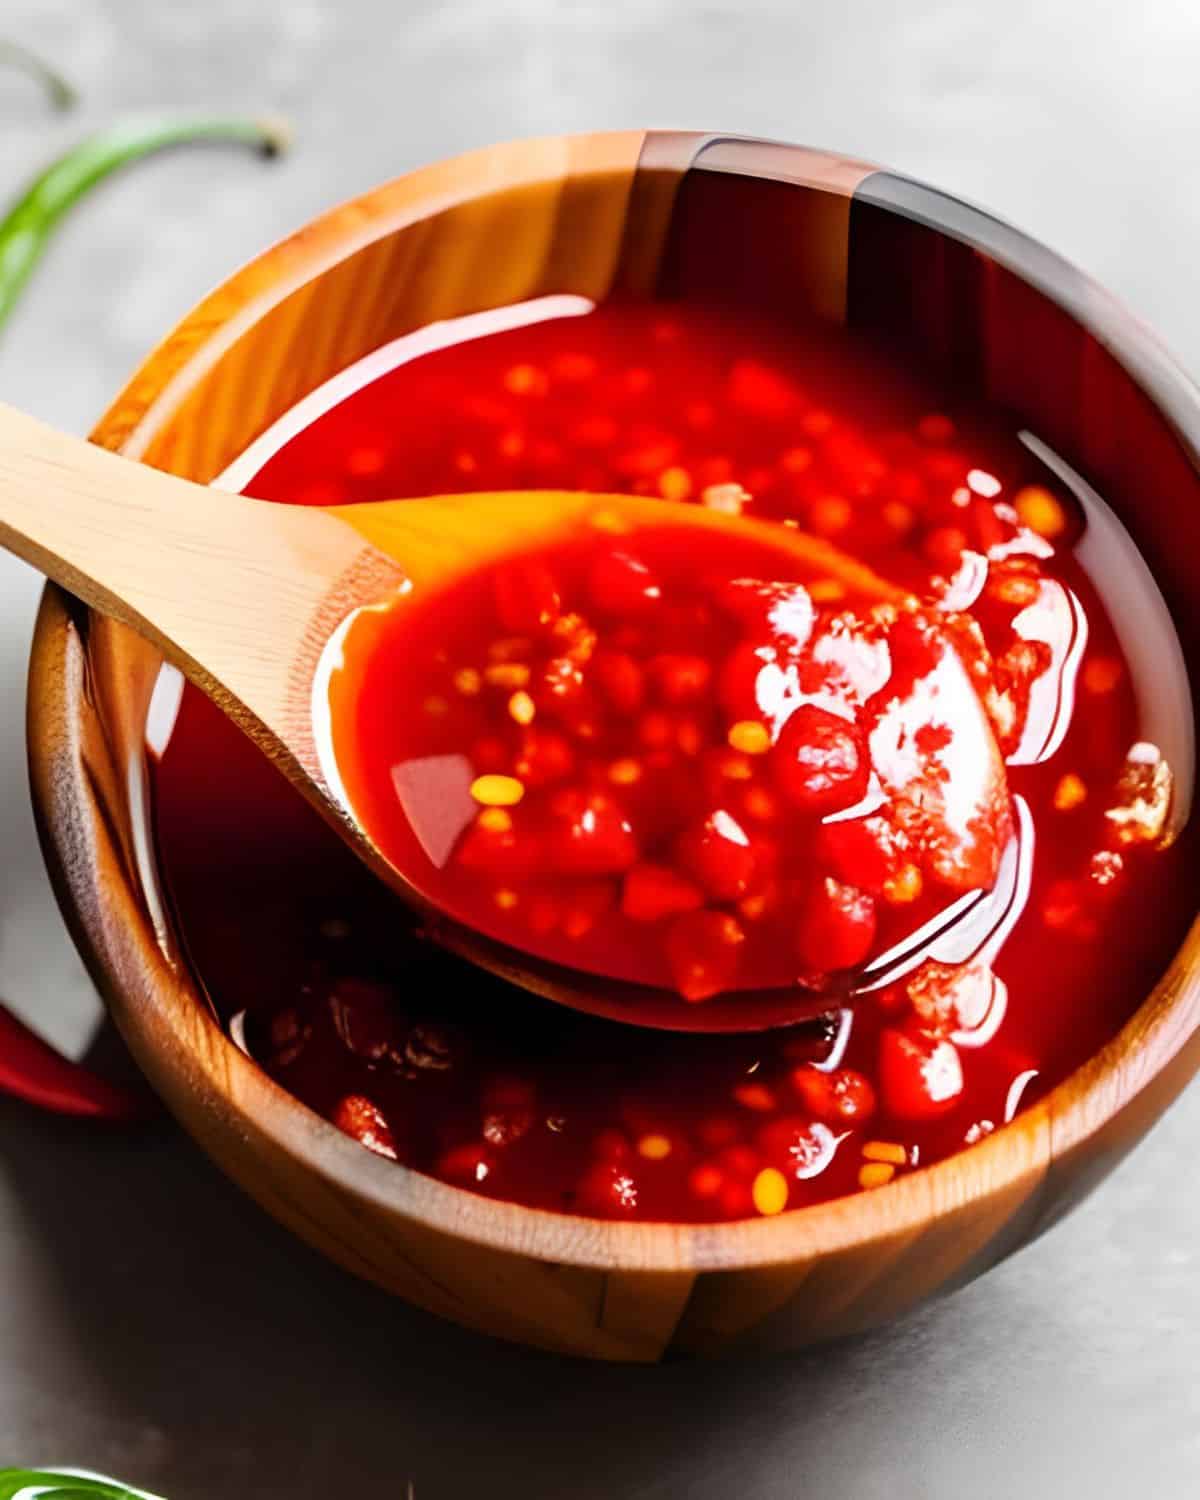 Sweet chili sauce in a bowl with a wooden spoon.